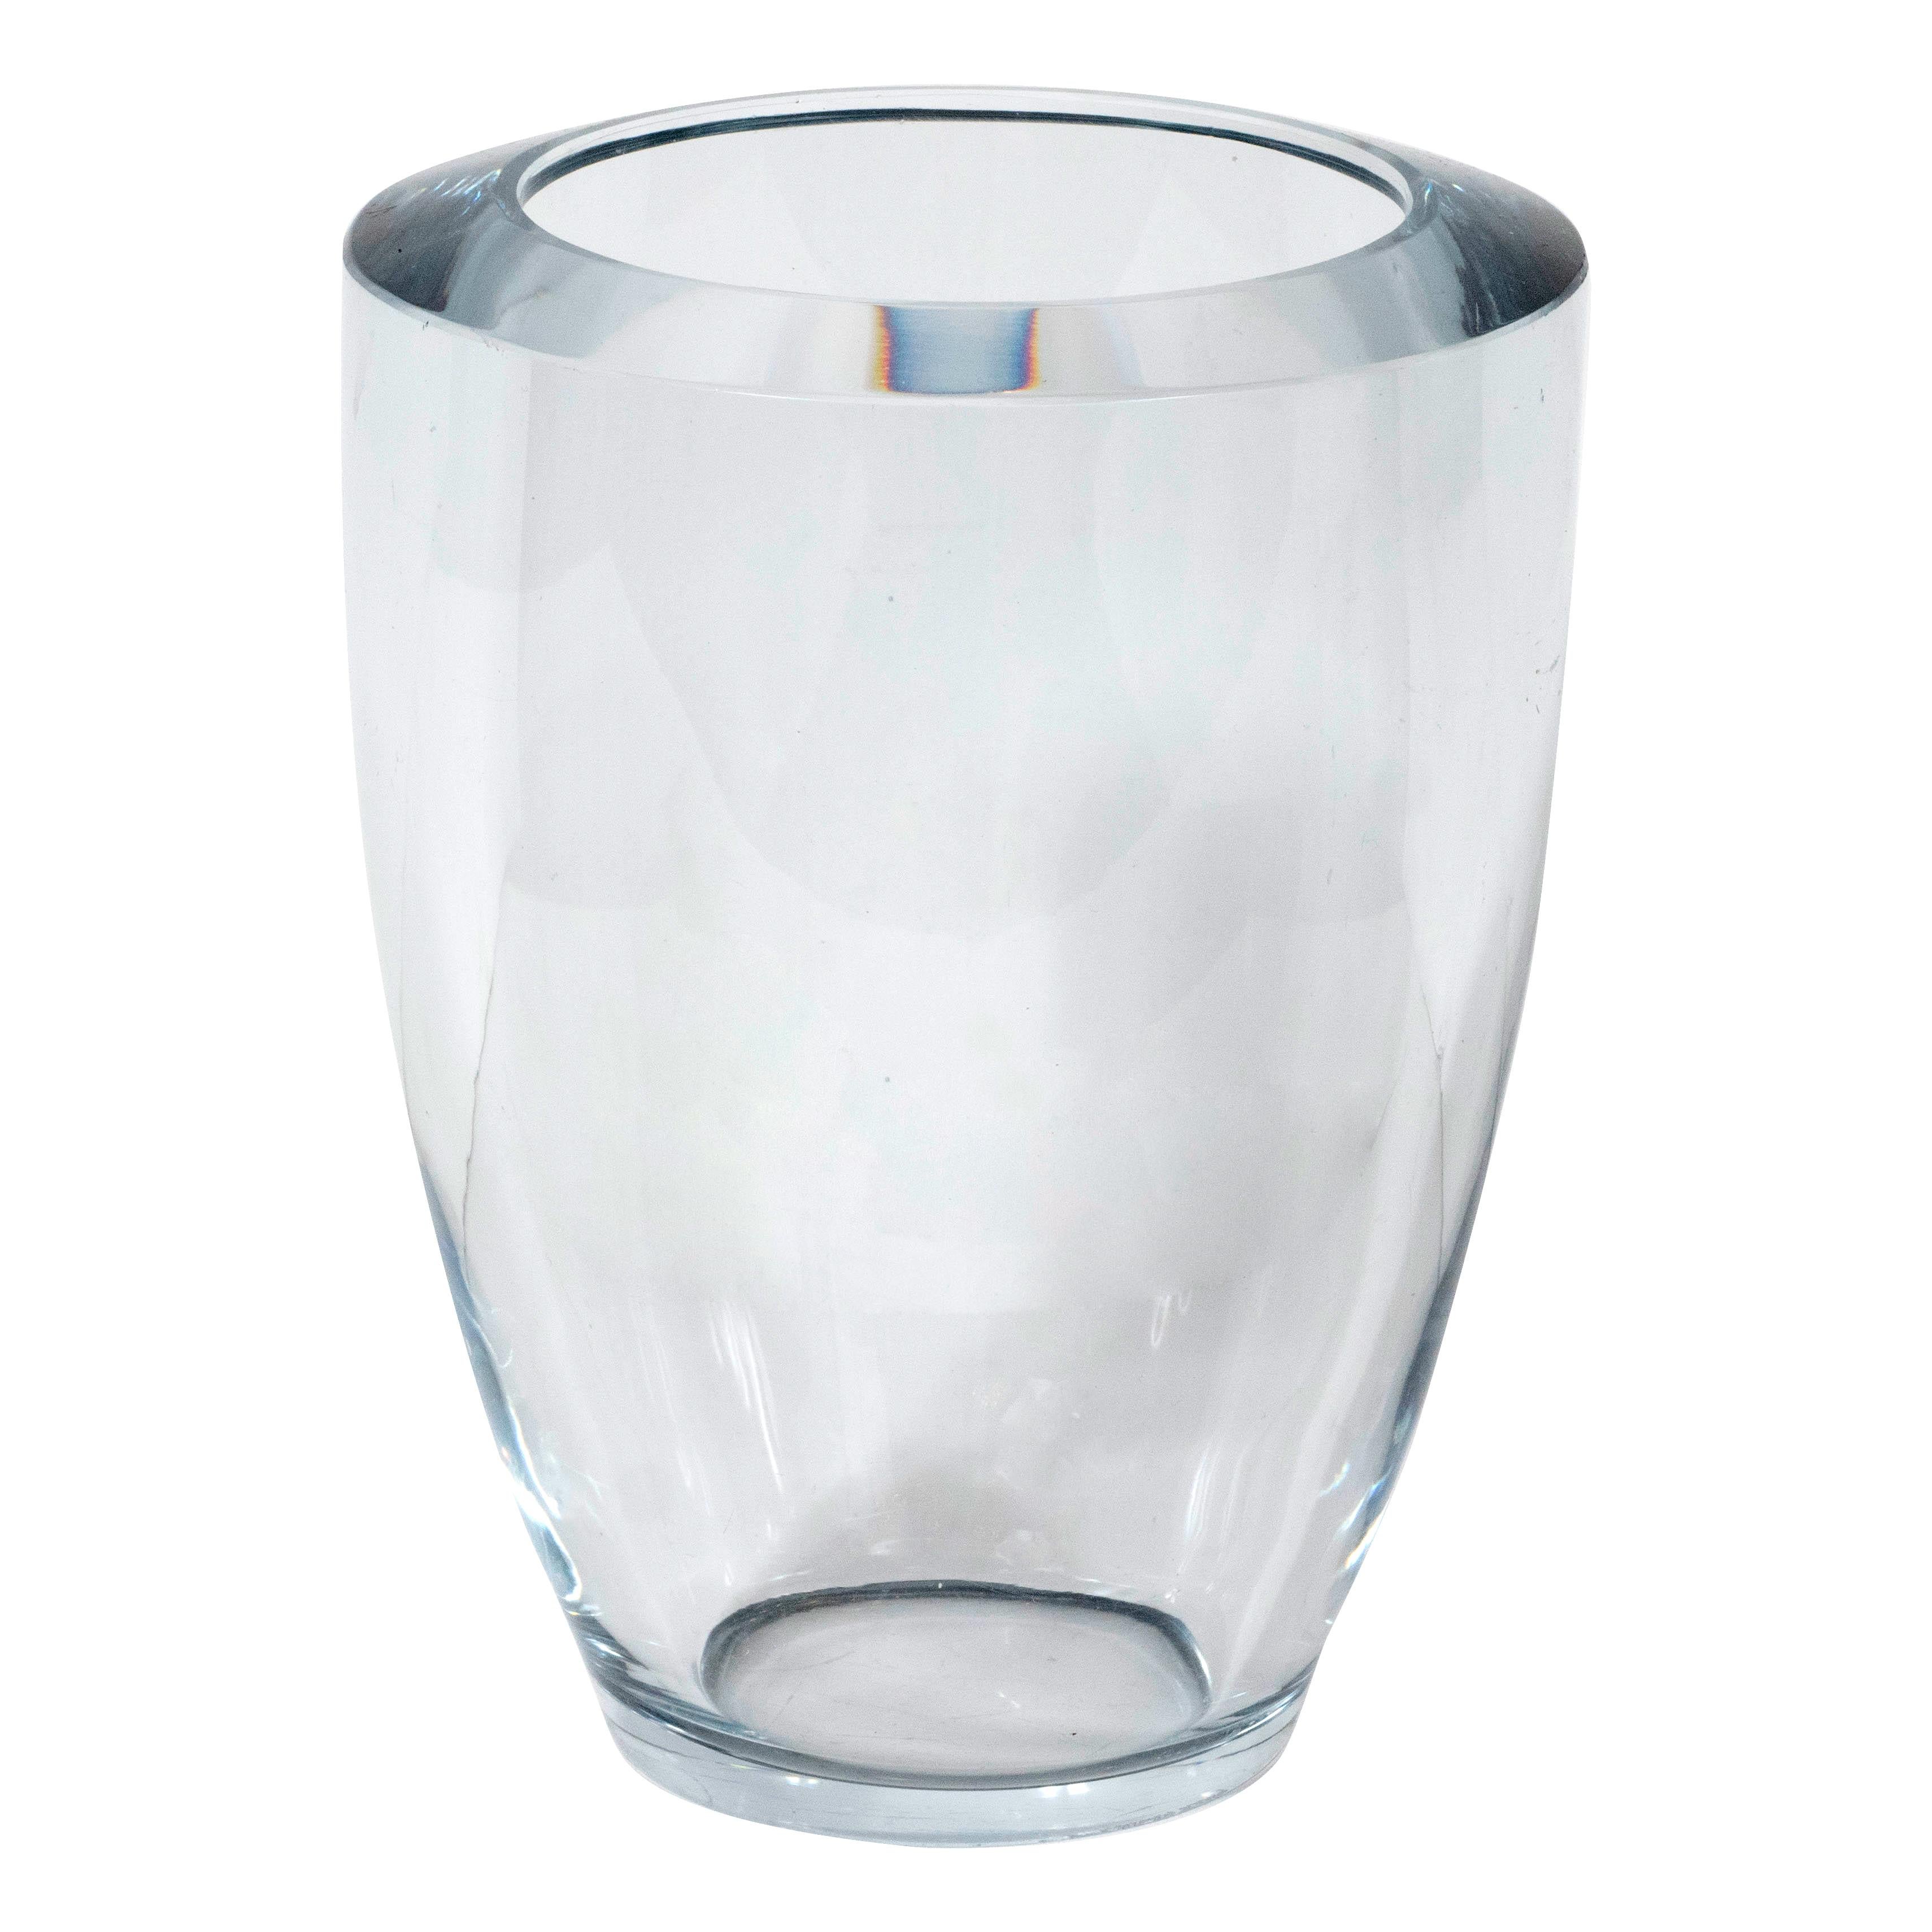 This elegant Mid-Century Modern vase was realized in Sweden circa 1960. It features a curved cylindrical volumetric body with a circular mouth in thick translucent pale blue hand blown glass. With its clean lines and beautiful glass quality, this